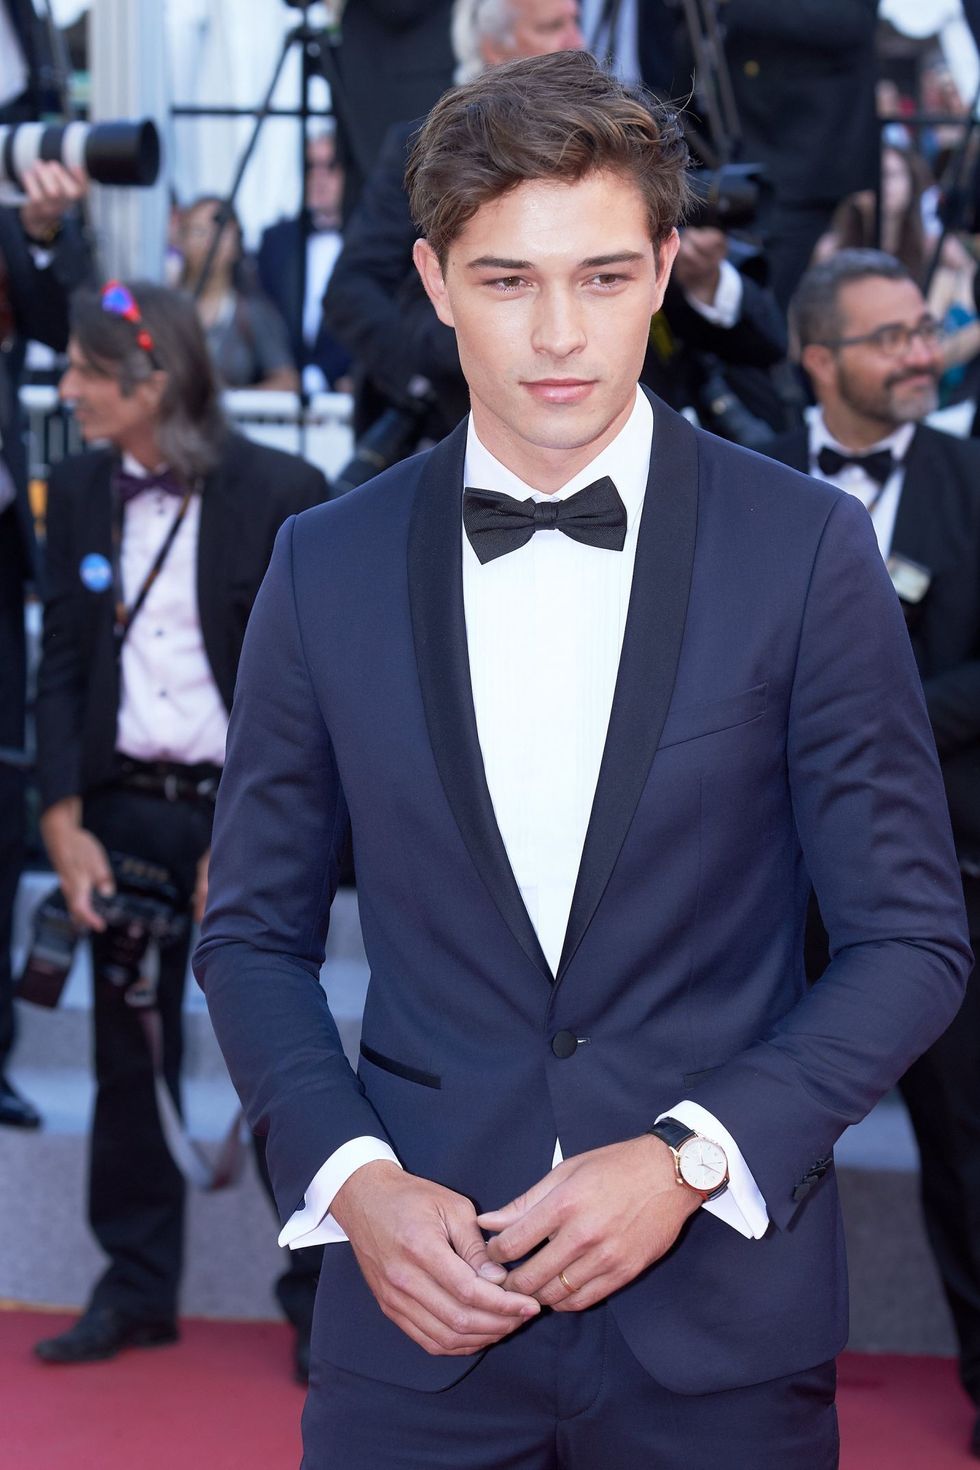 Francisco Lachowski facts: keep reading to know more about the organizing agency of fashion shows of this Brazilian Ford model.